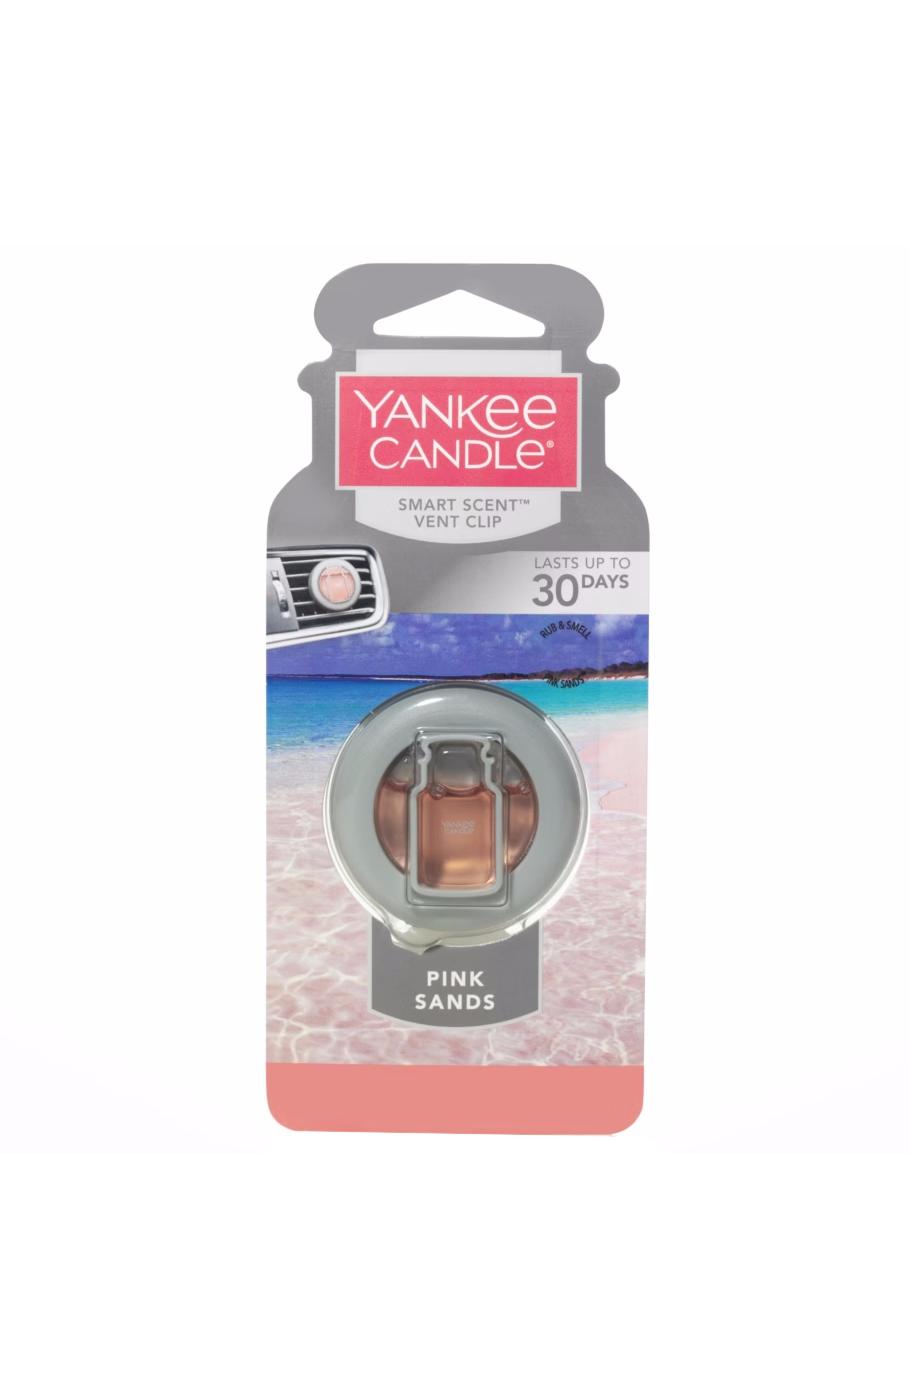 Yankee Candle Smart Scent Vent Clip - Pink Sands; image 1 of 3